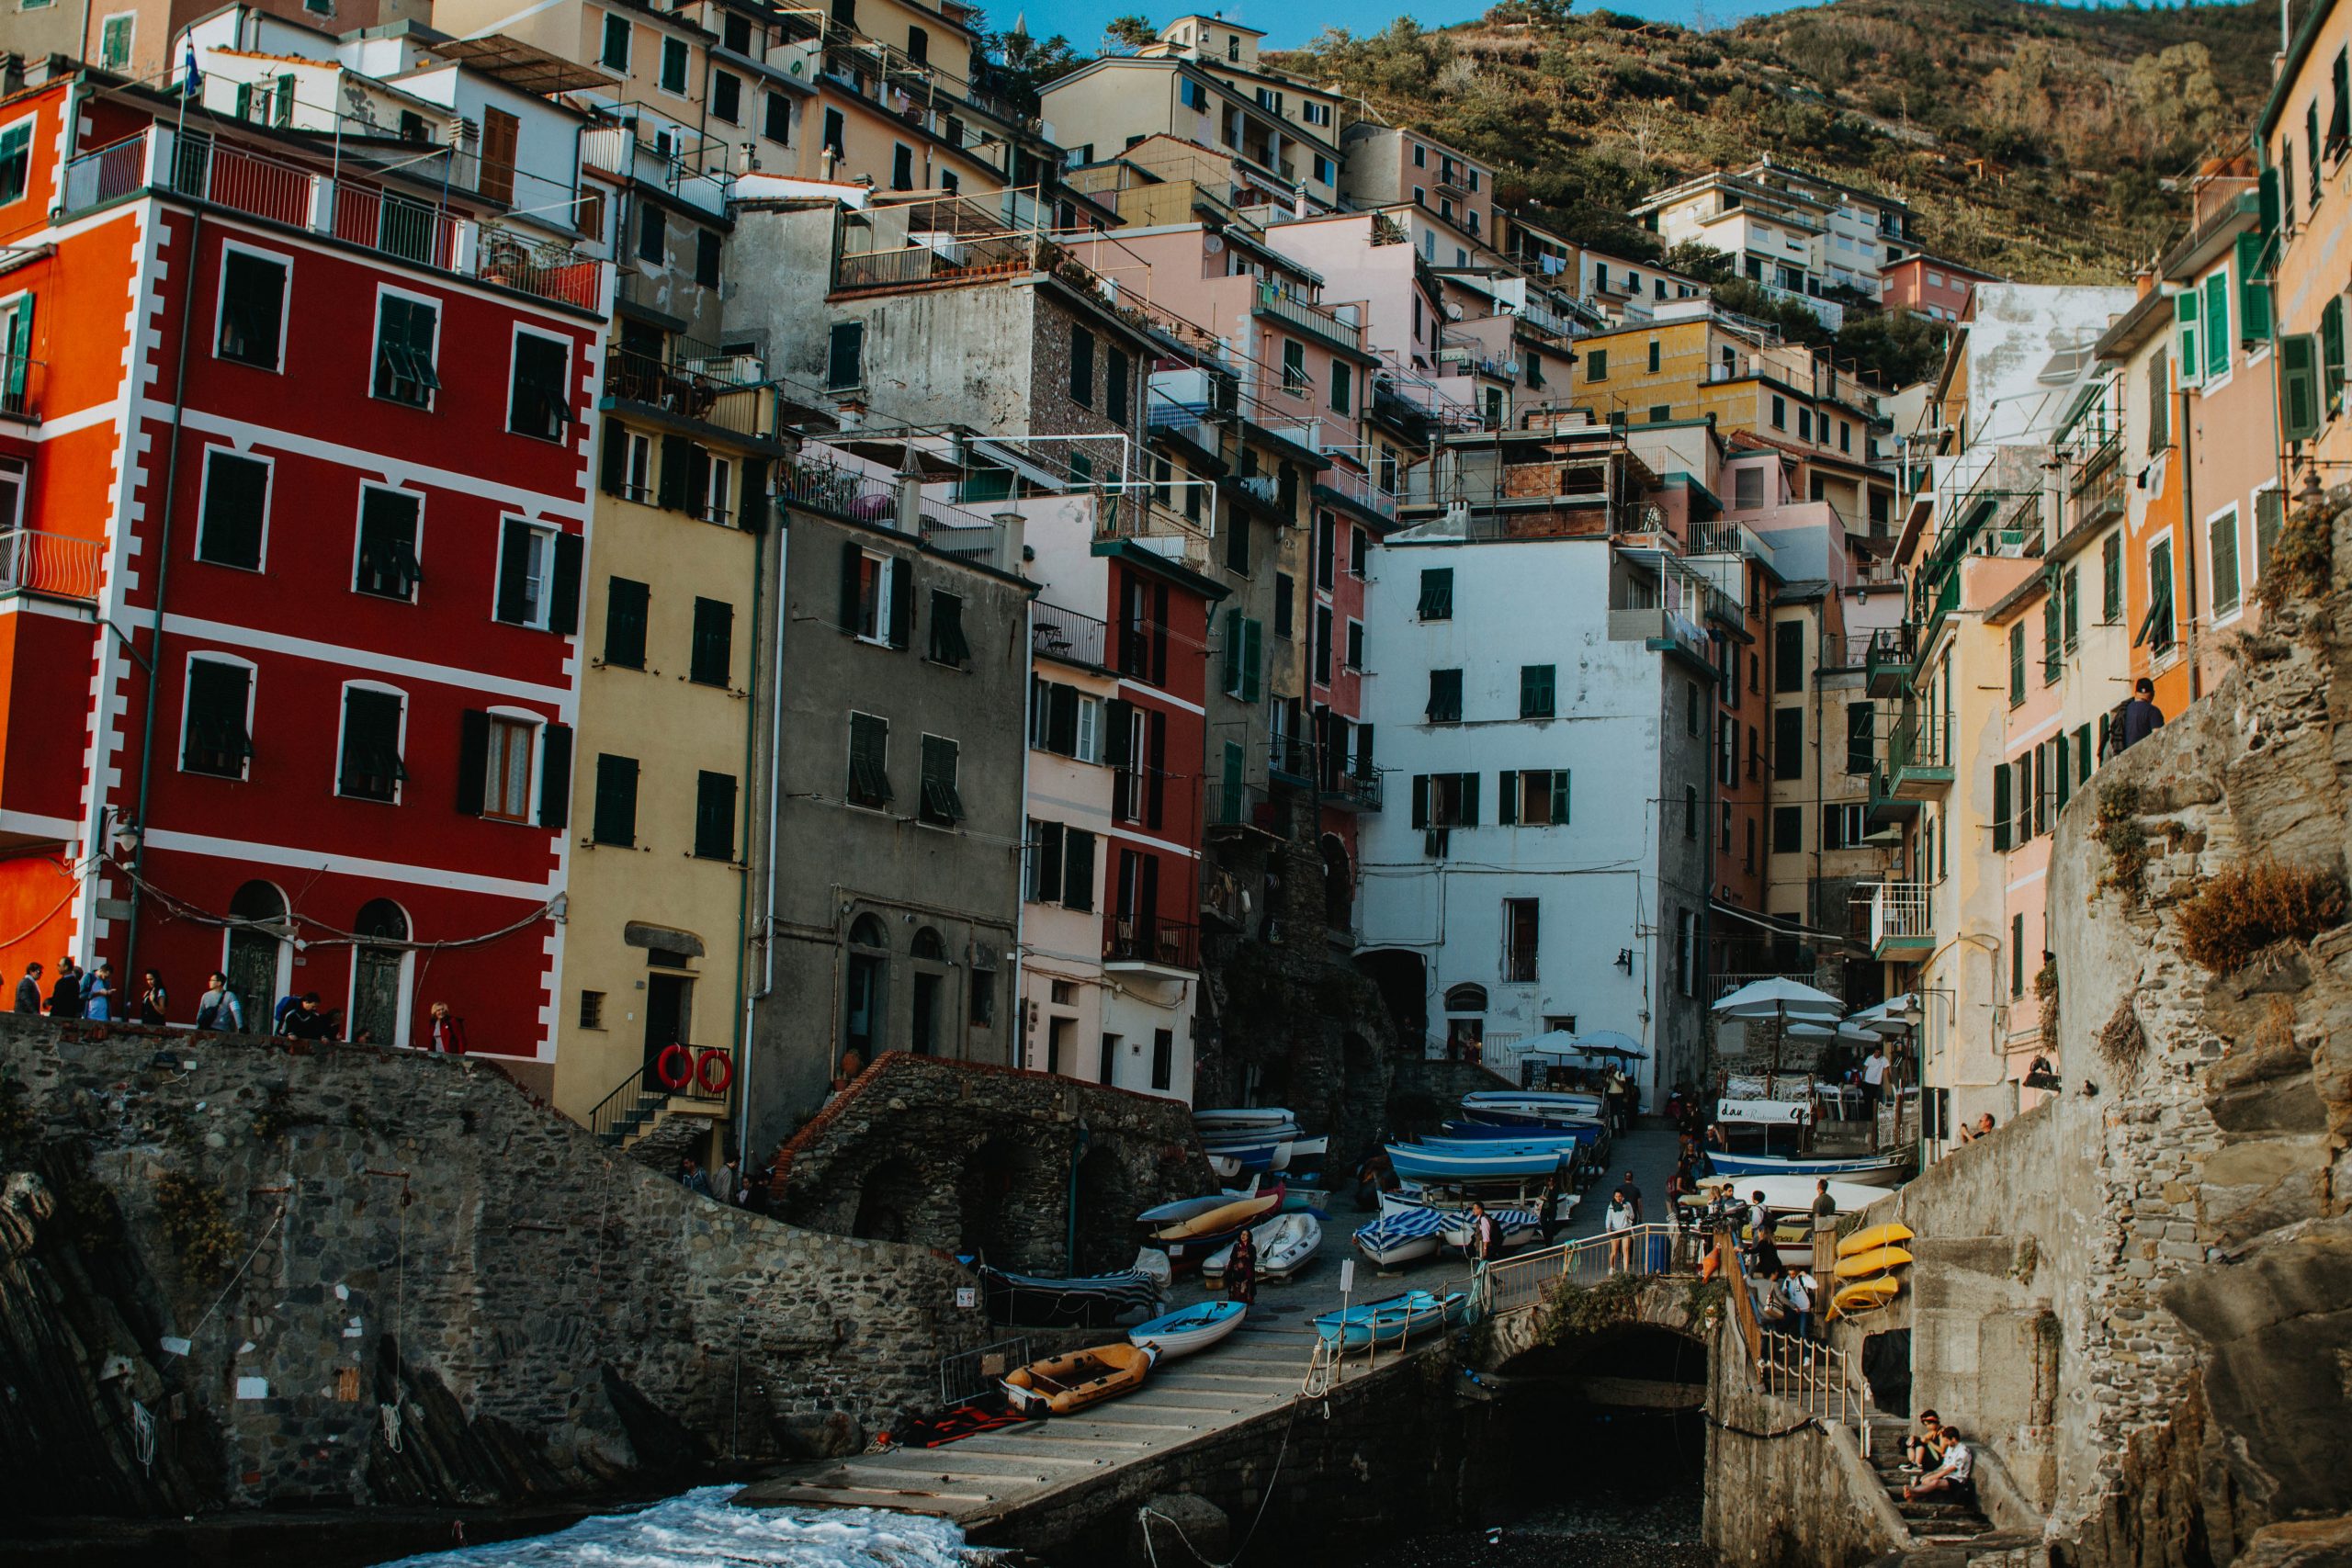 Colourful houses of Riomaggiore by the harbour